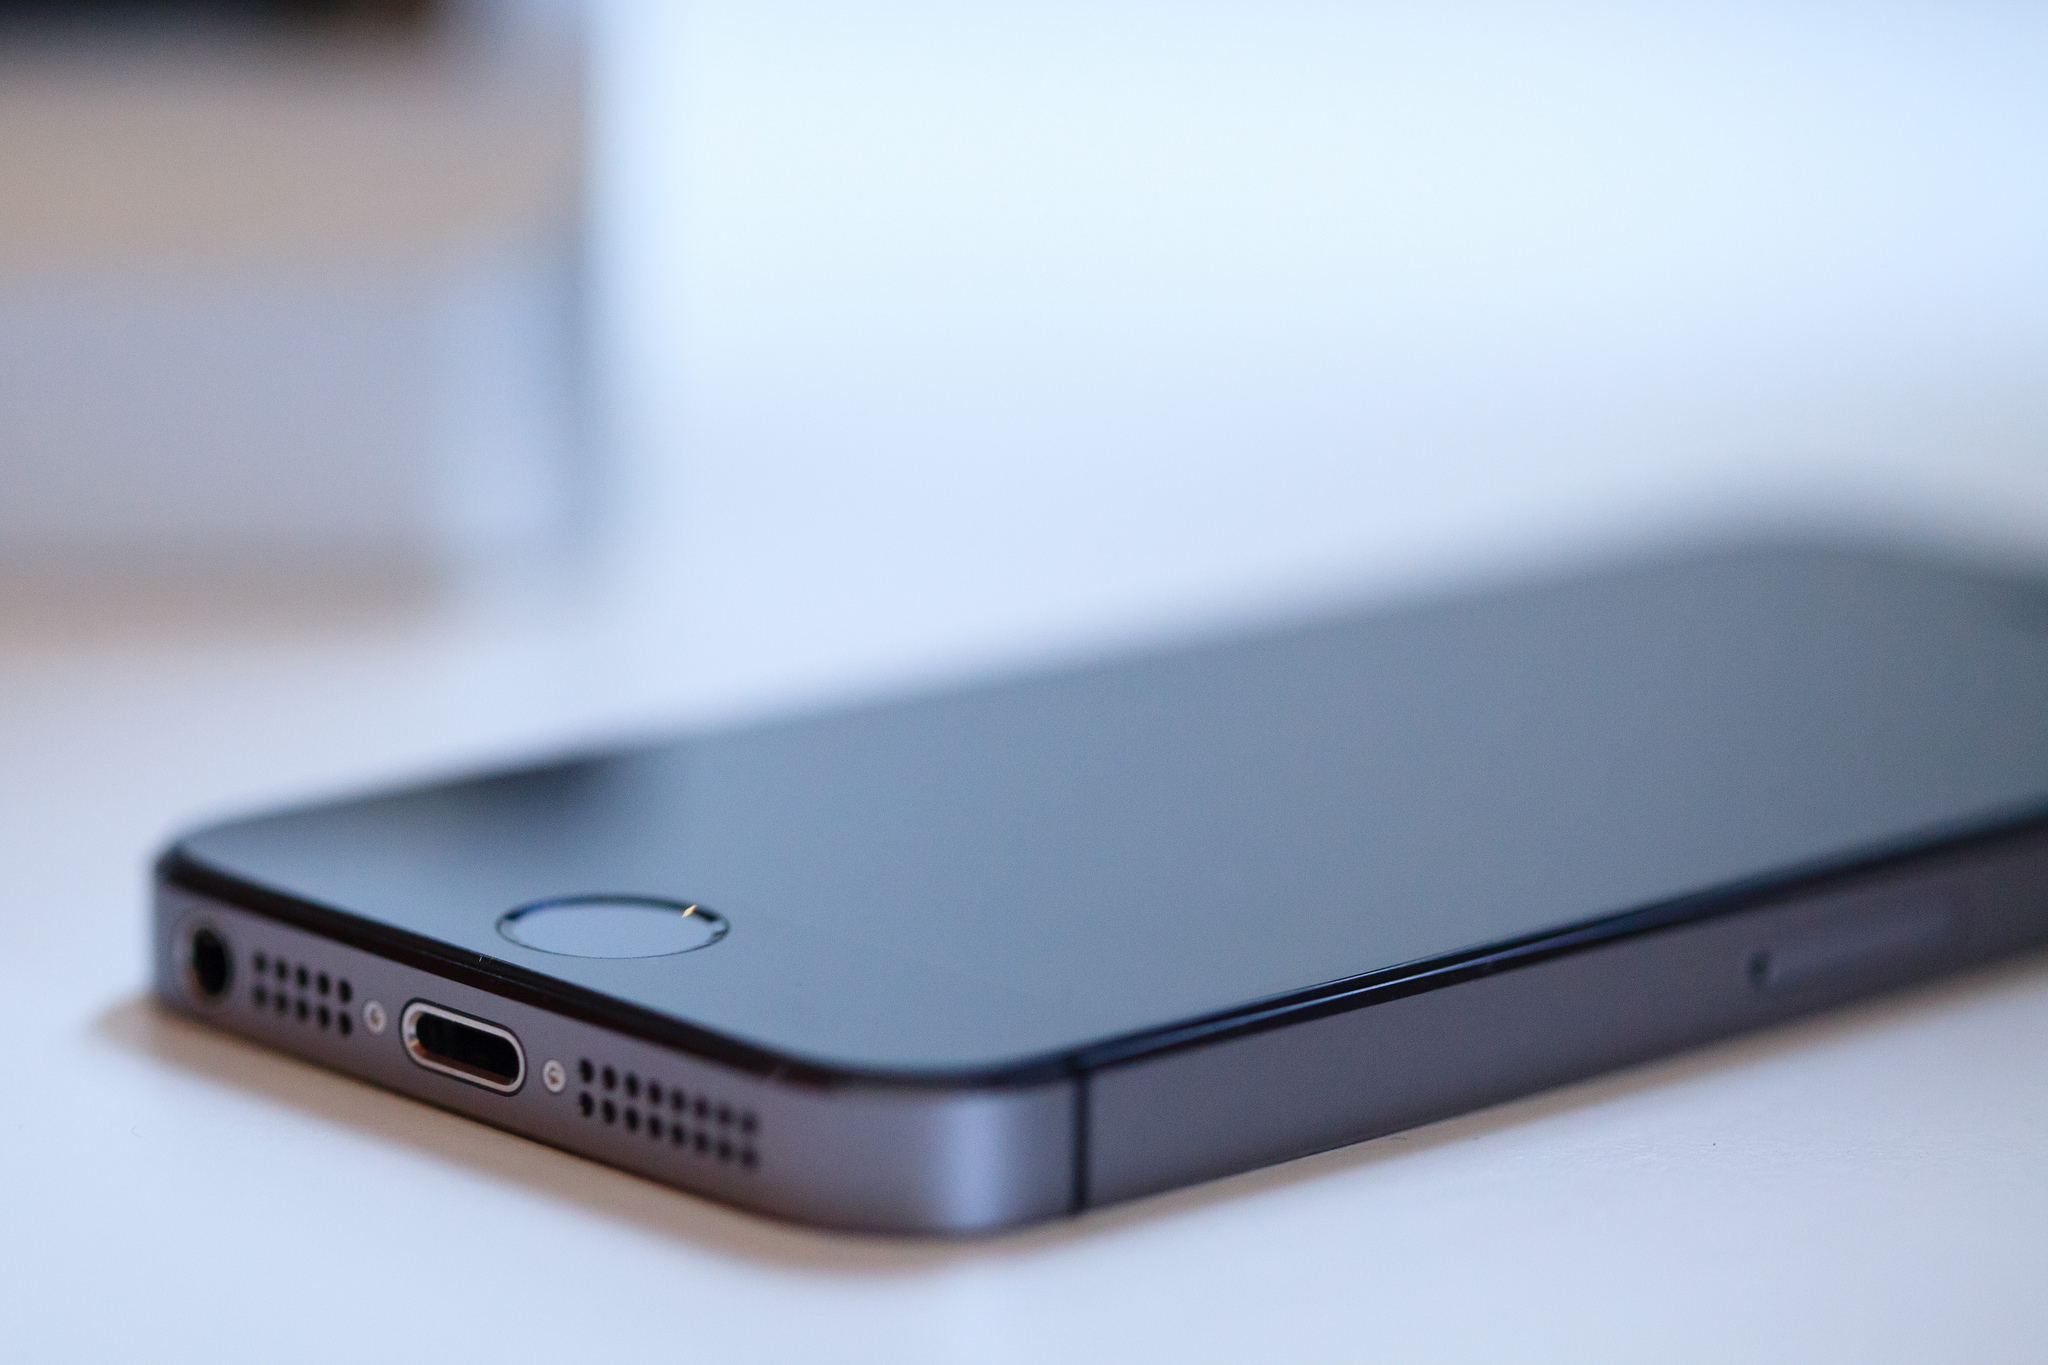 New Iphone 5s Space Gray Color Is On A White Table - Wallpaper , HD Wallpaper & Backgrounds